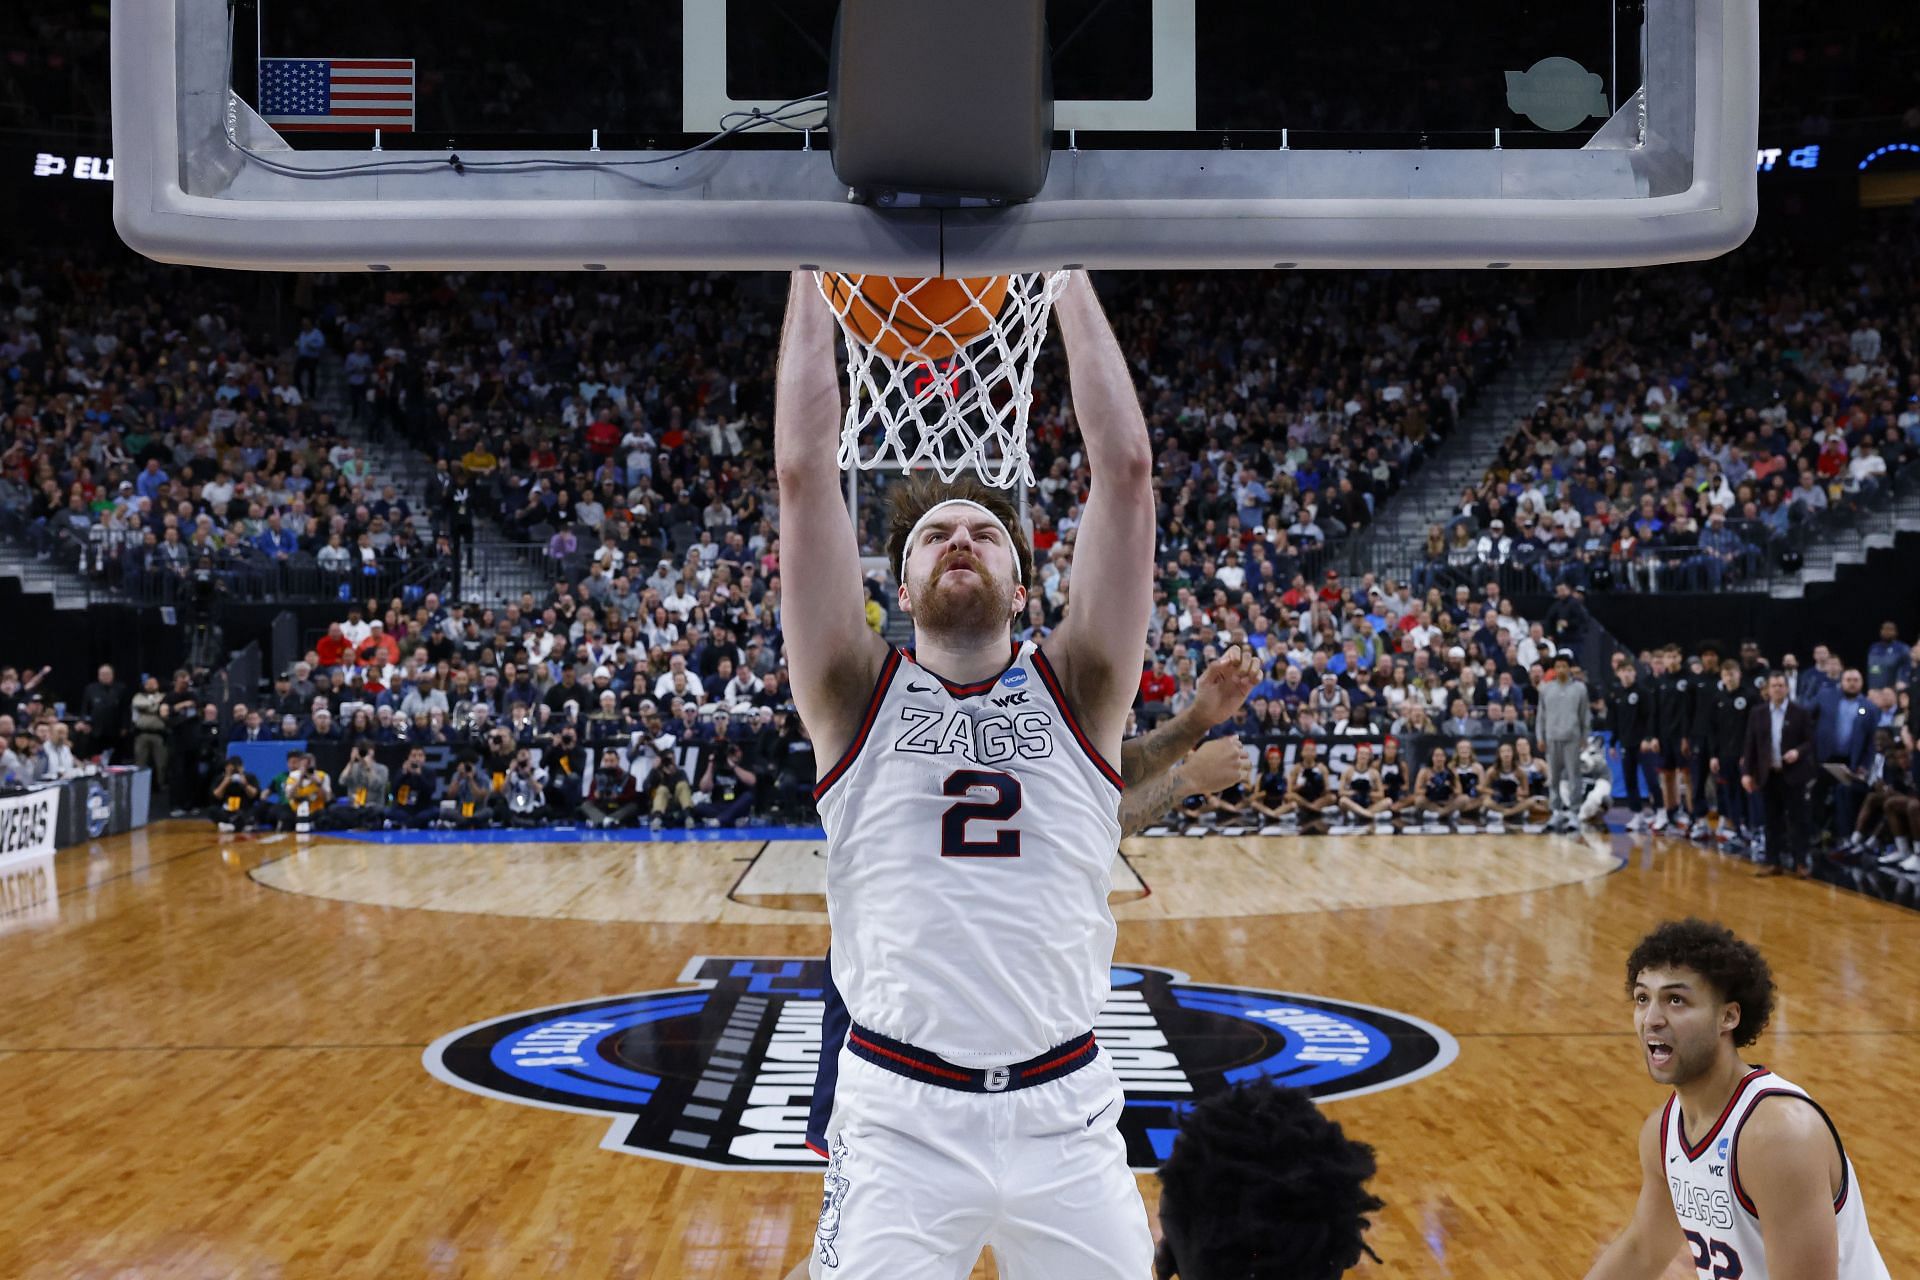 Drew Timme in a Connecticut v Gonzaga game